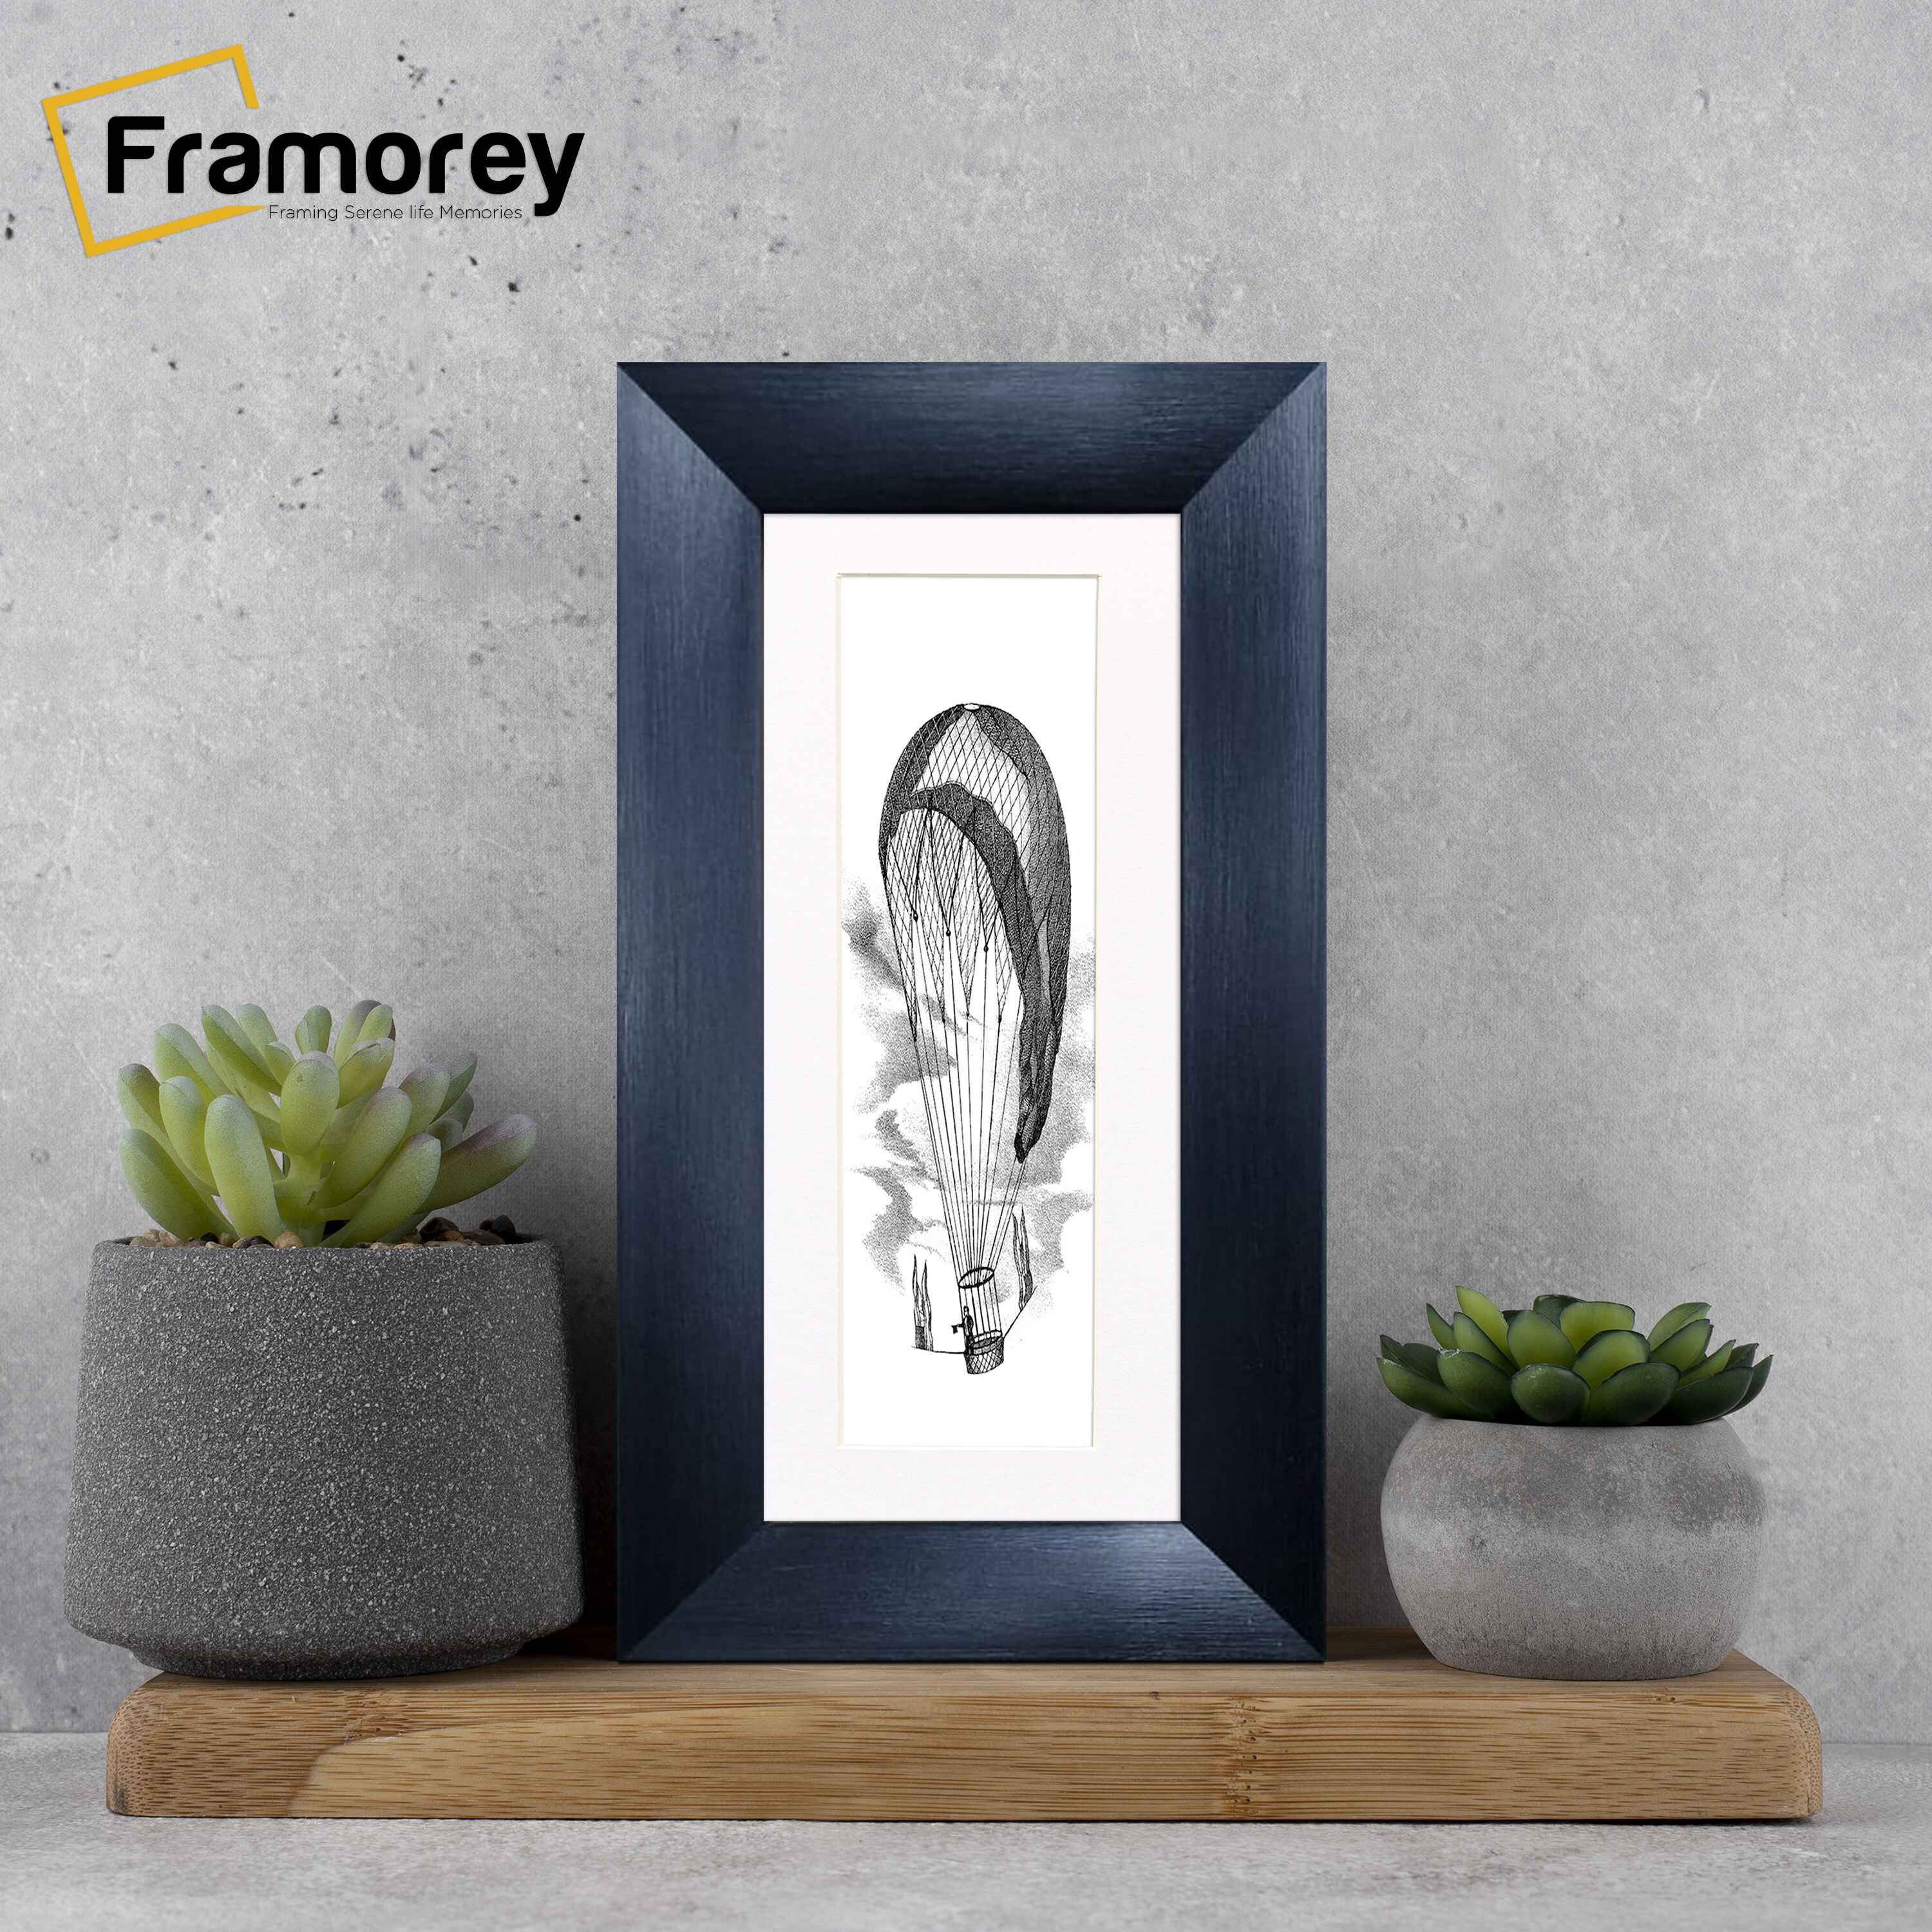 Panoramic Size Brushed Black Engraved Frames Handmade Poster Frames With White Mount